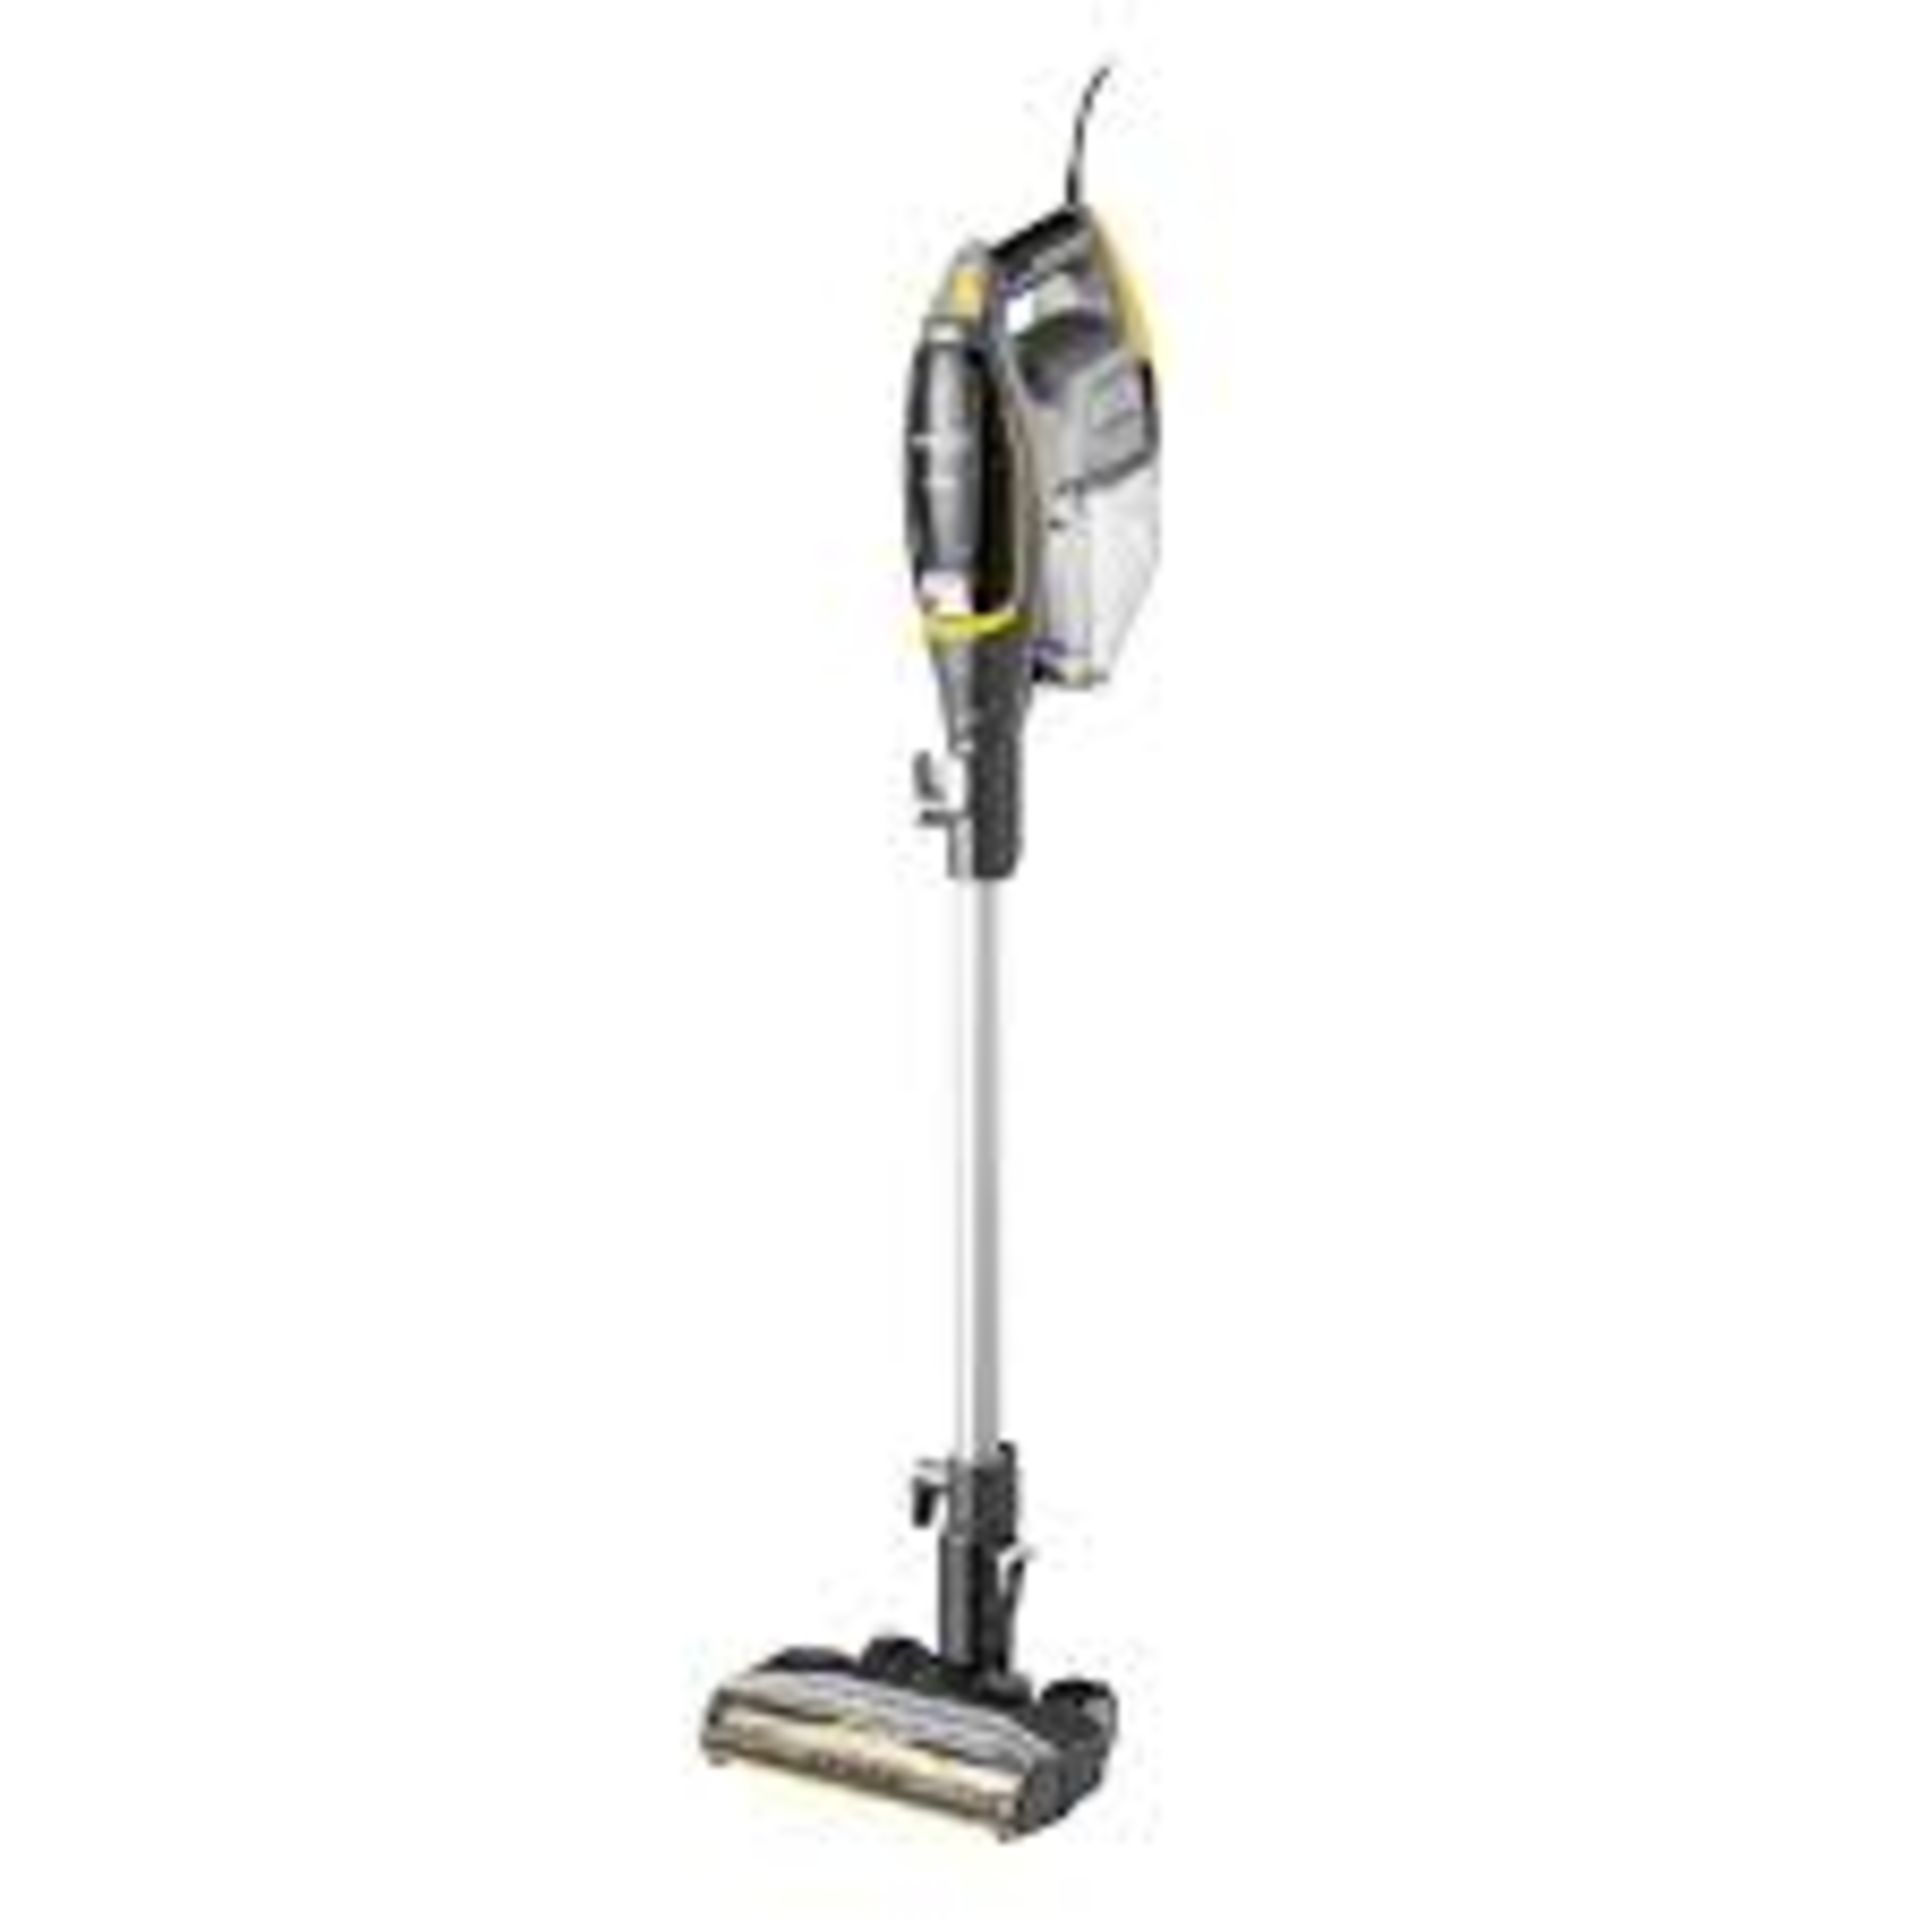 6 X BRAND NEW Eureka NES510 2-in-1 Corded Stick & Handheld Vacuum Cleaner, 400W Motor for Whole - Image 2 of 3